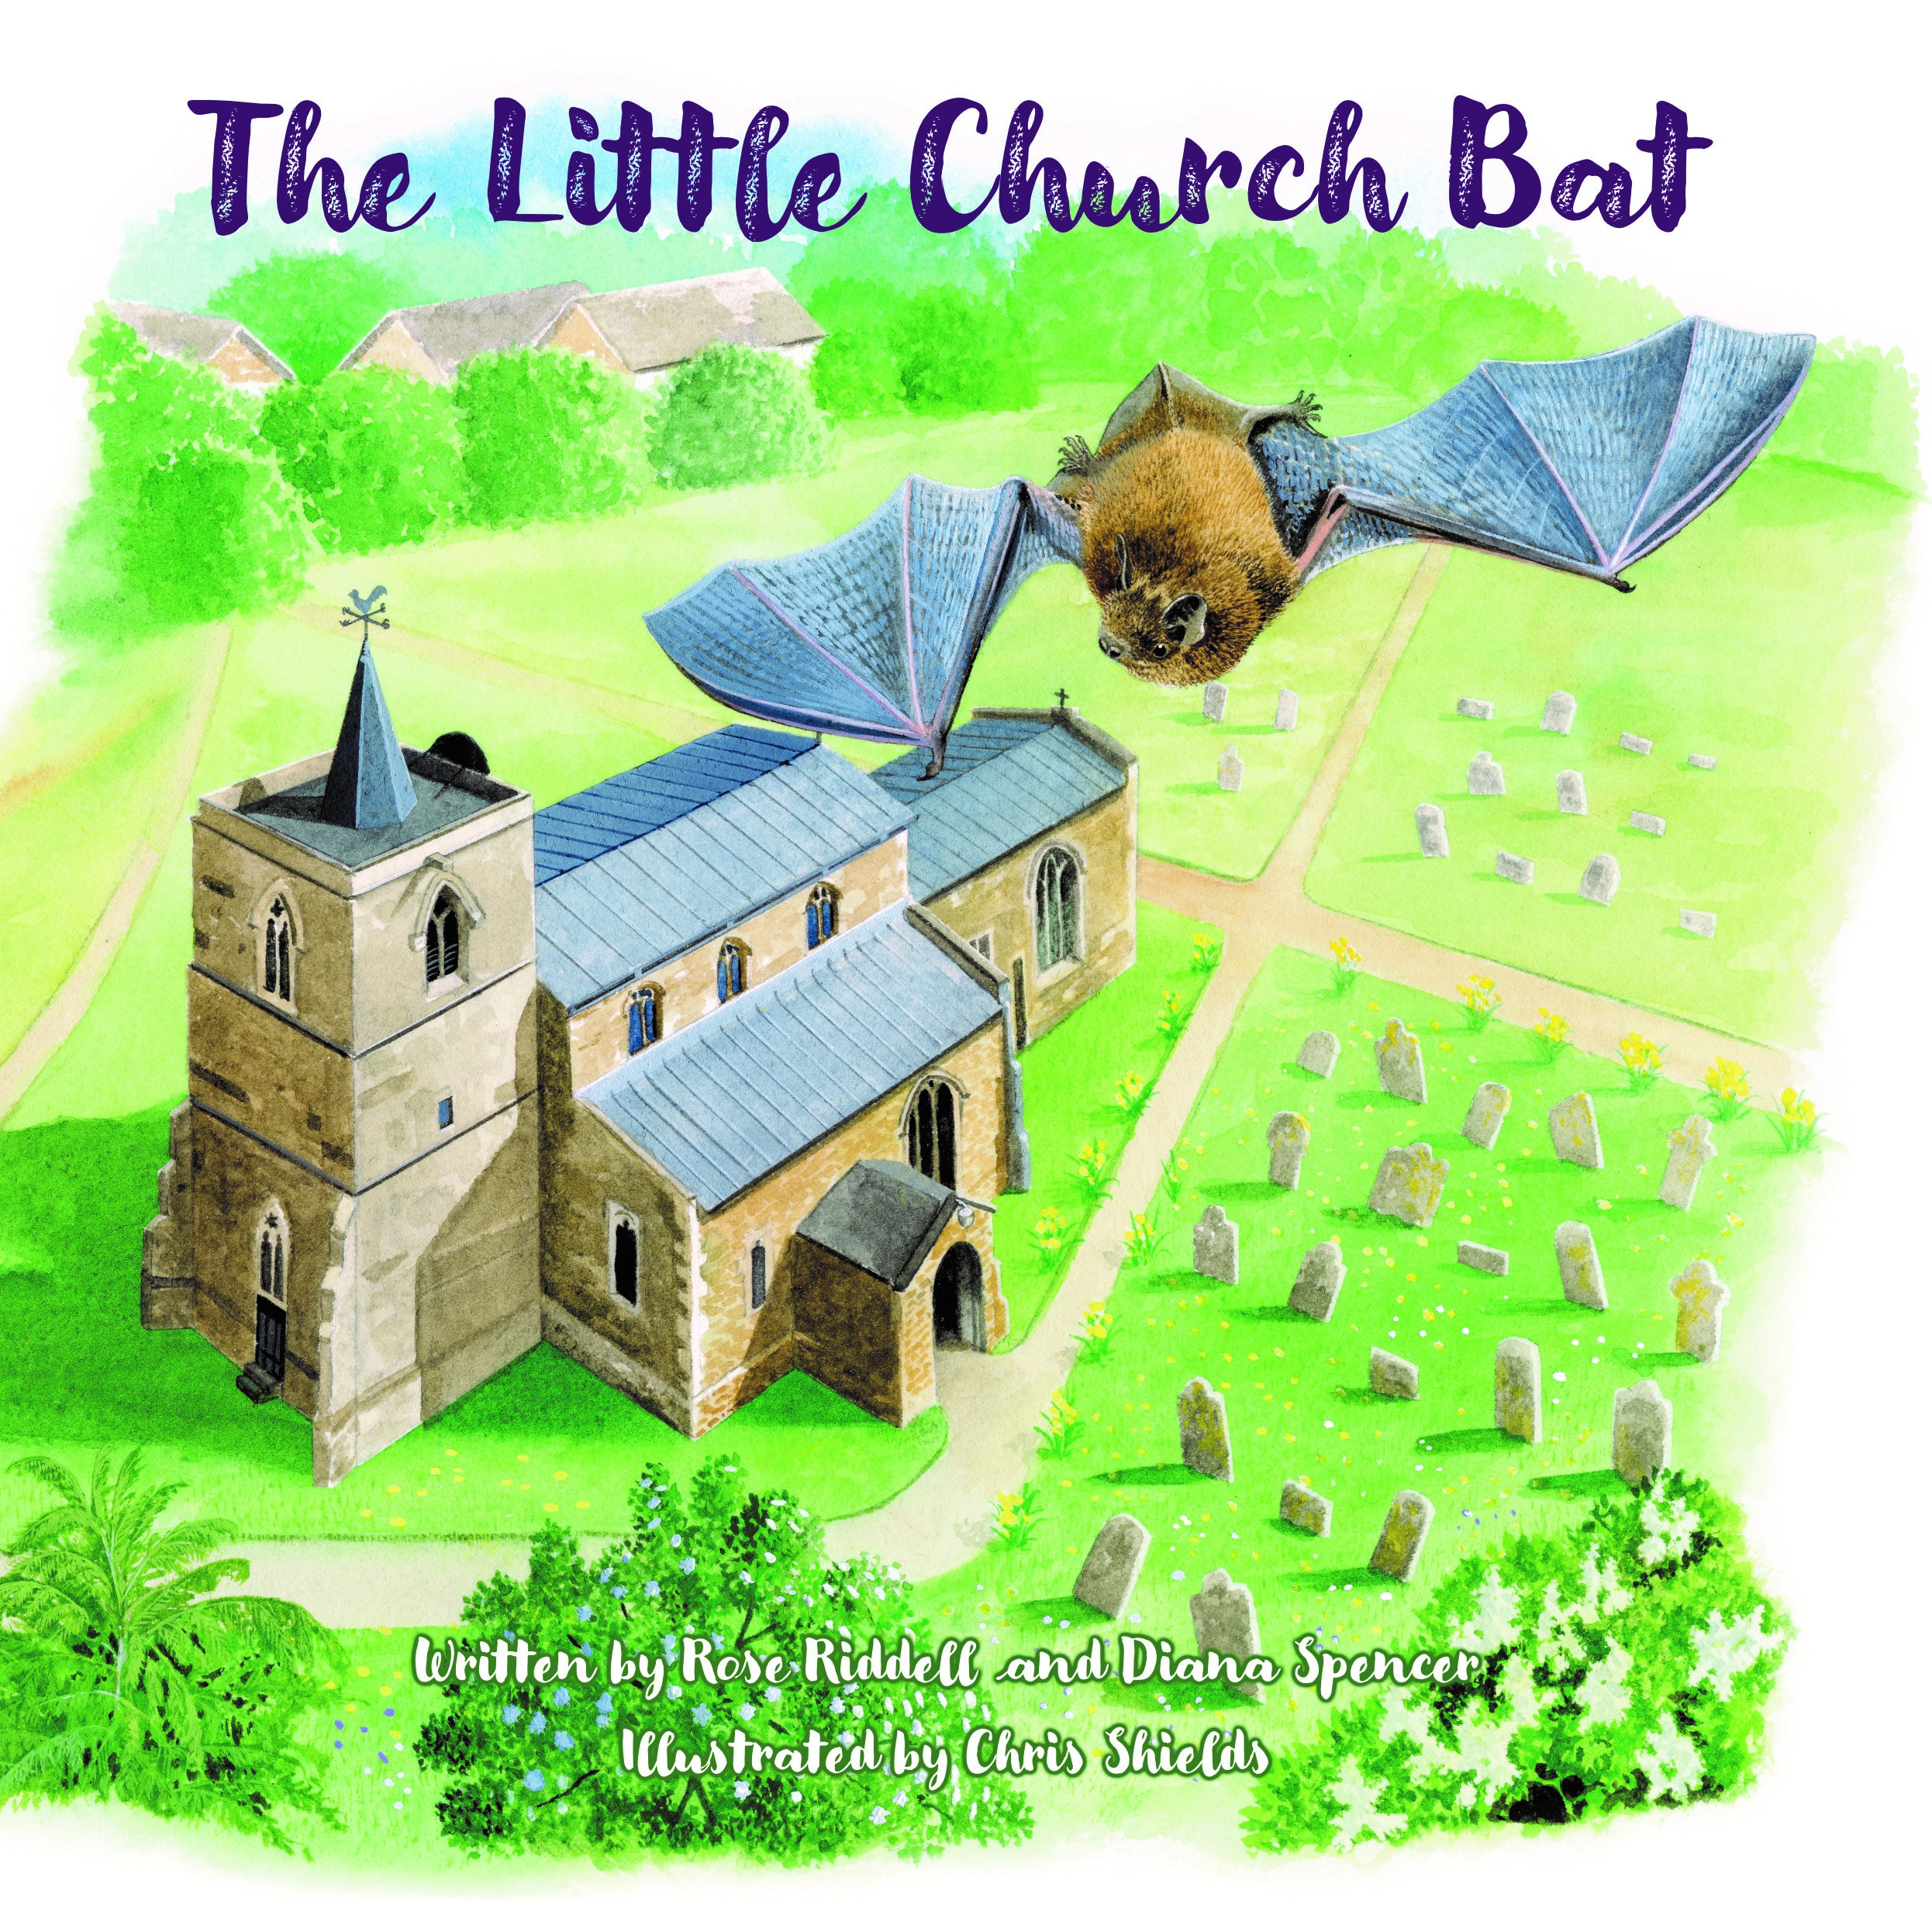 Cover of the Little Church Bat book featuring a watercolour of bats at Braunston church